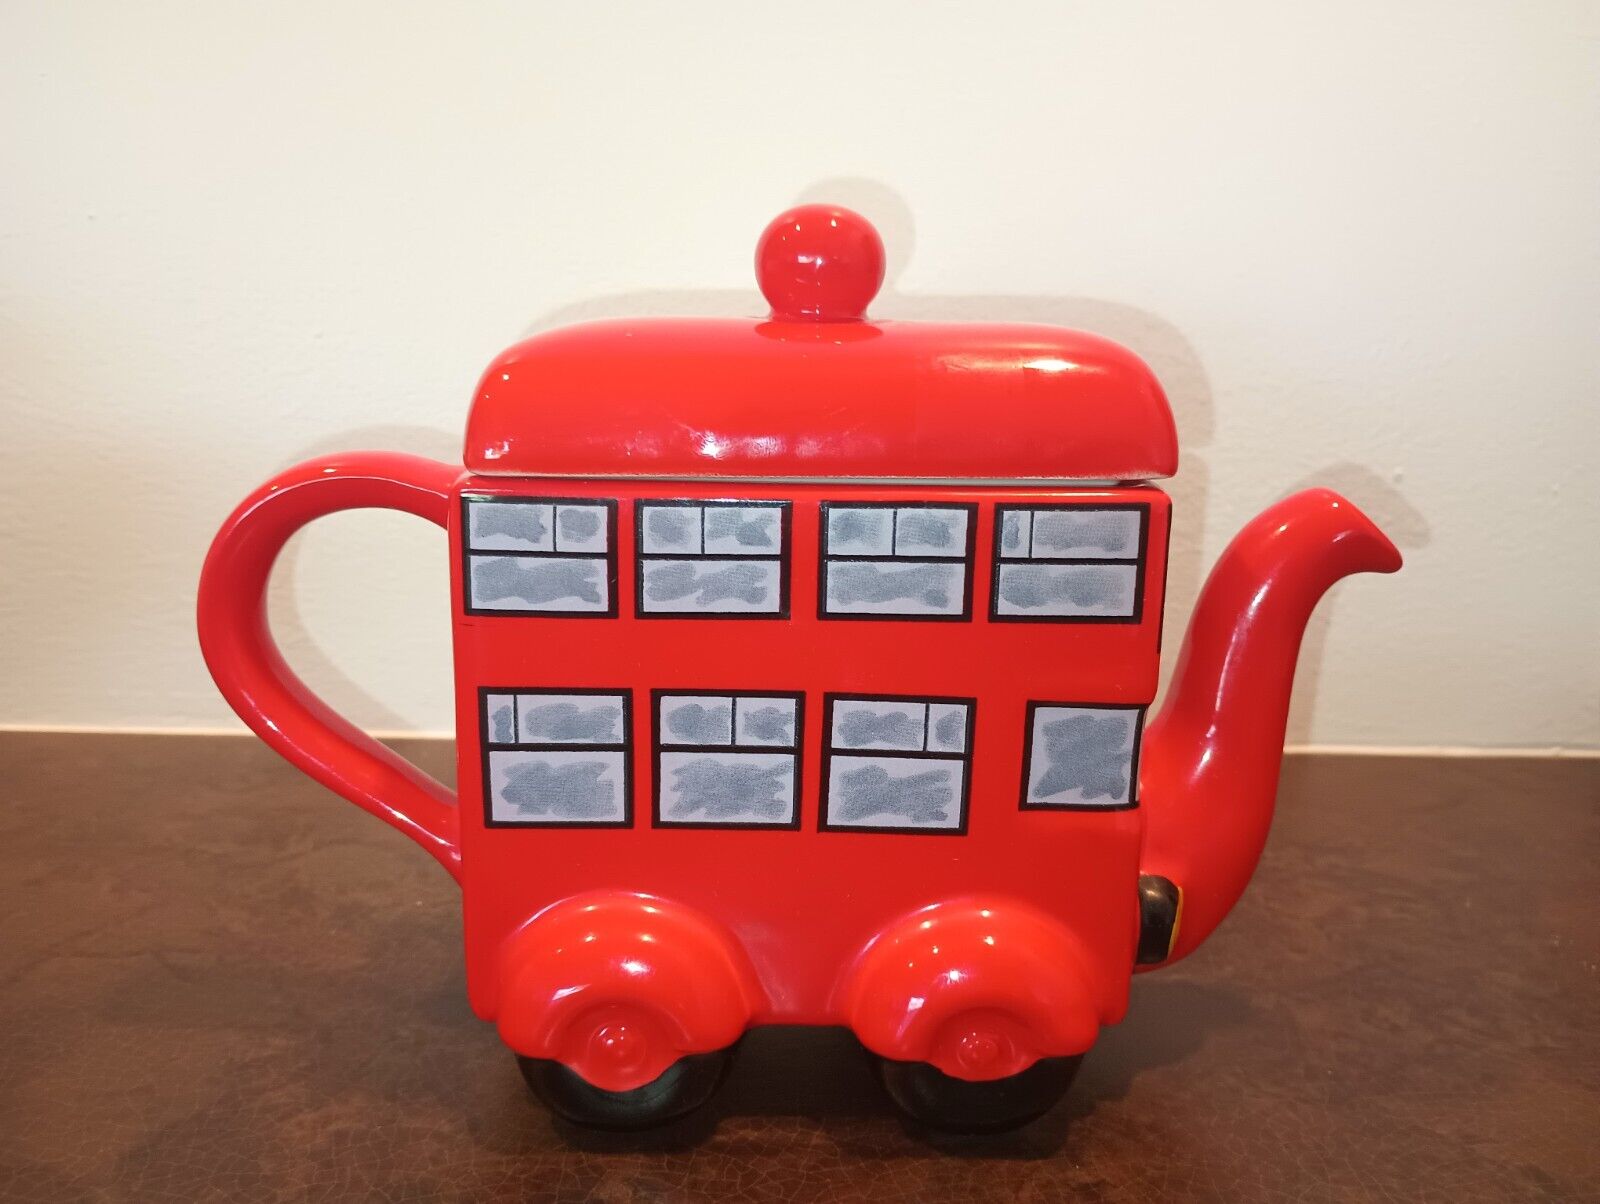 VINTAGE PRICE KENSINGTON POTTERIES - MADE IN ENGLAND - RED LONDON BUS TEAPOT